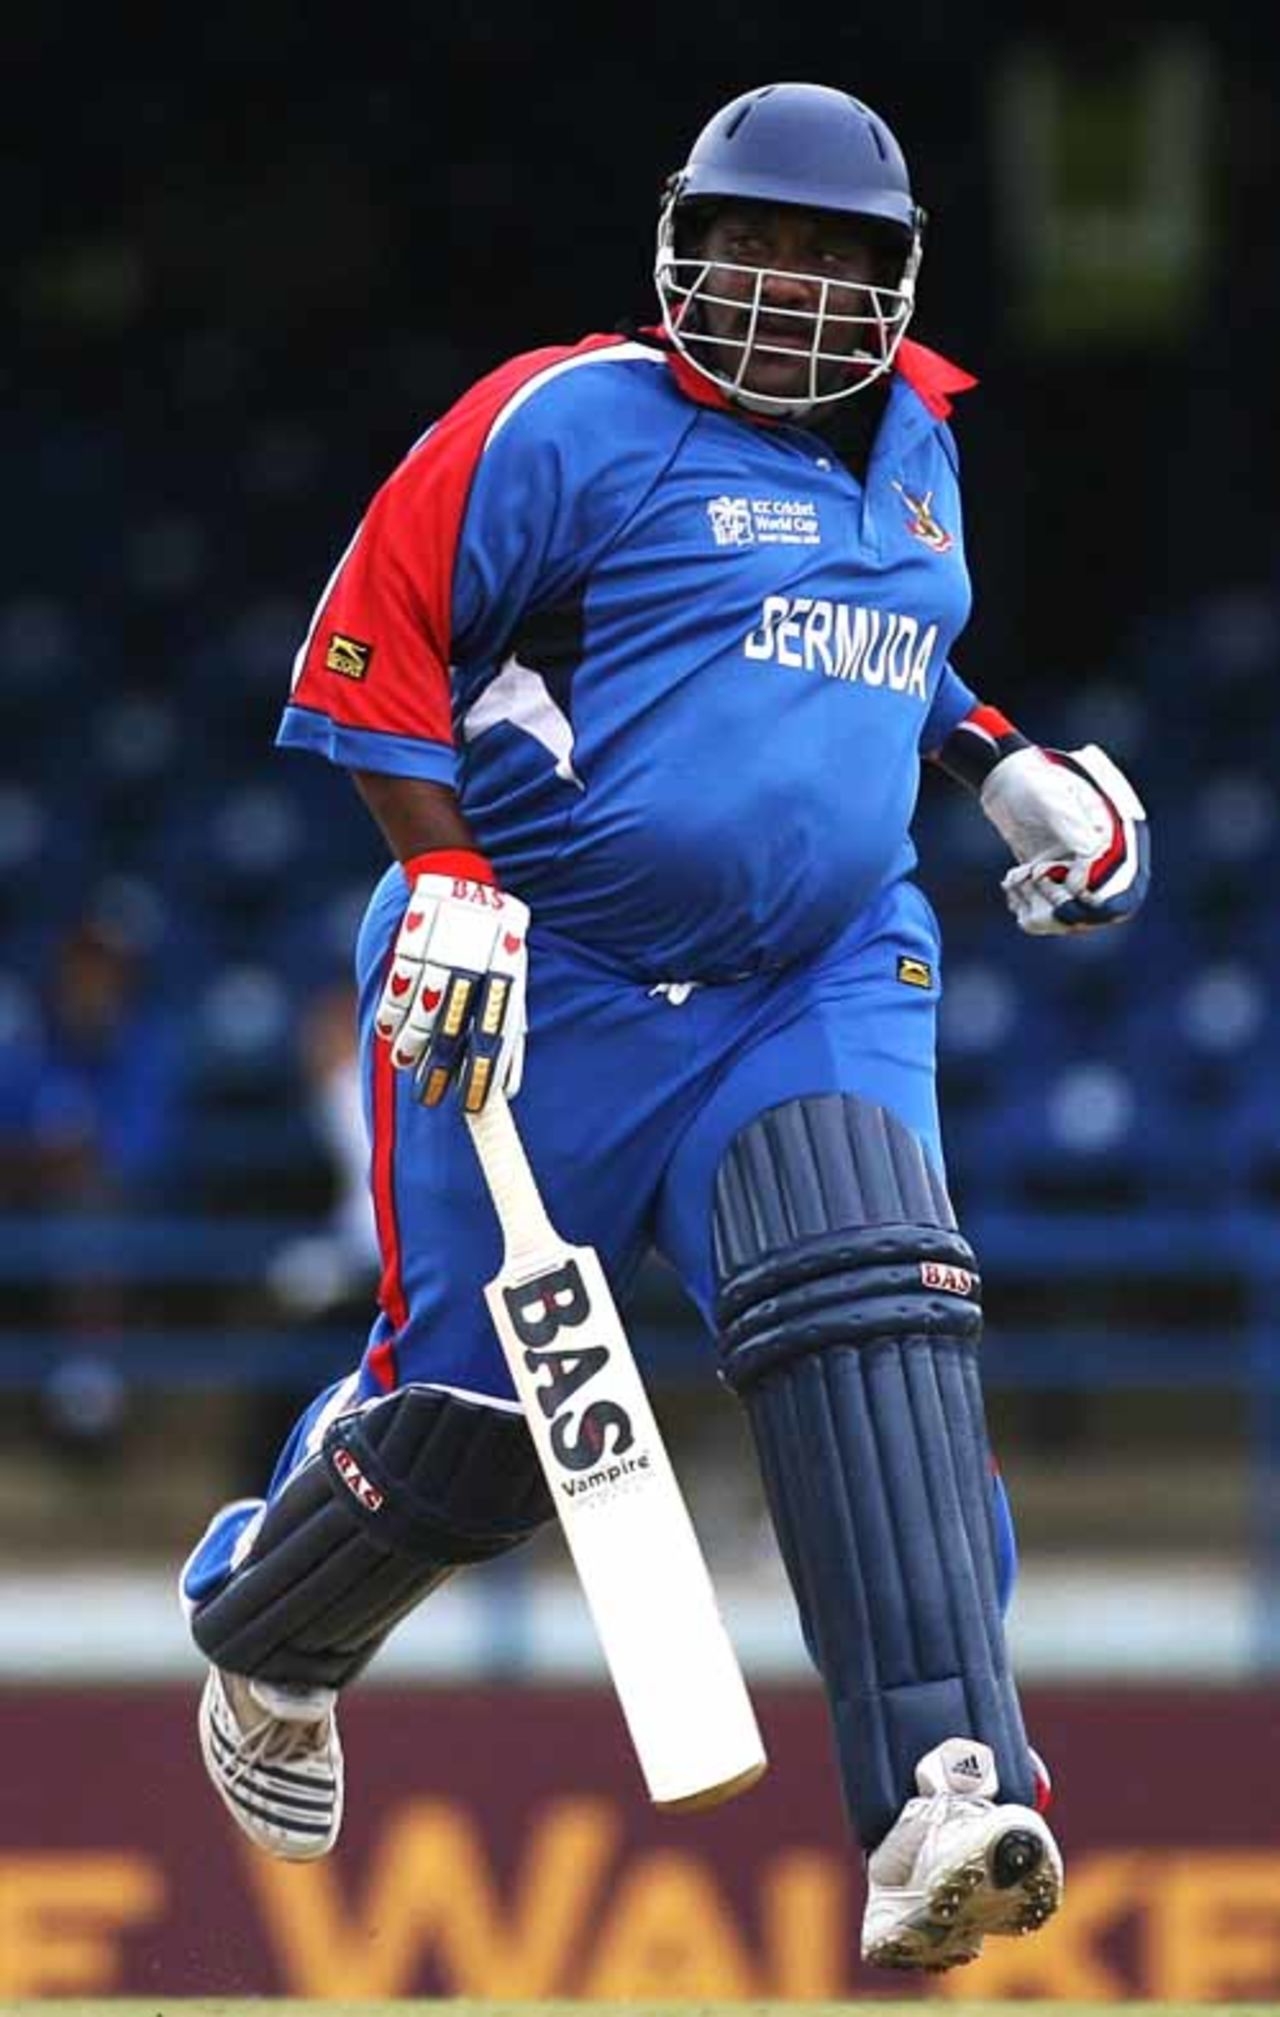 Dwayne Leverock huffs and puffs for a single and gets there comfortably, Bermuda v India, Group B, Trinidad, March 19, 2007